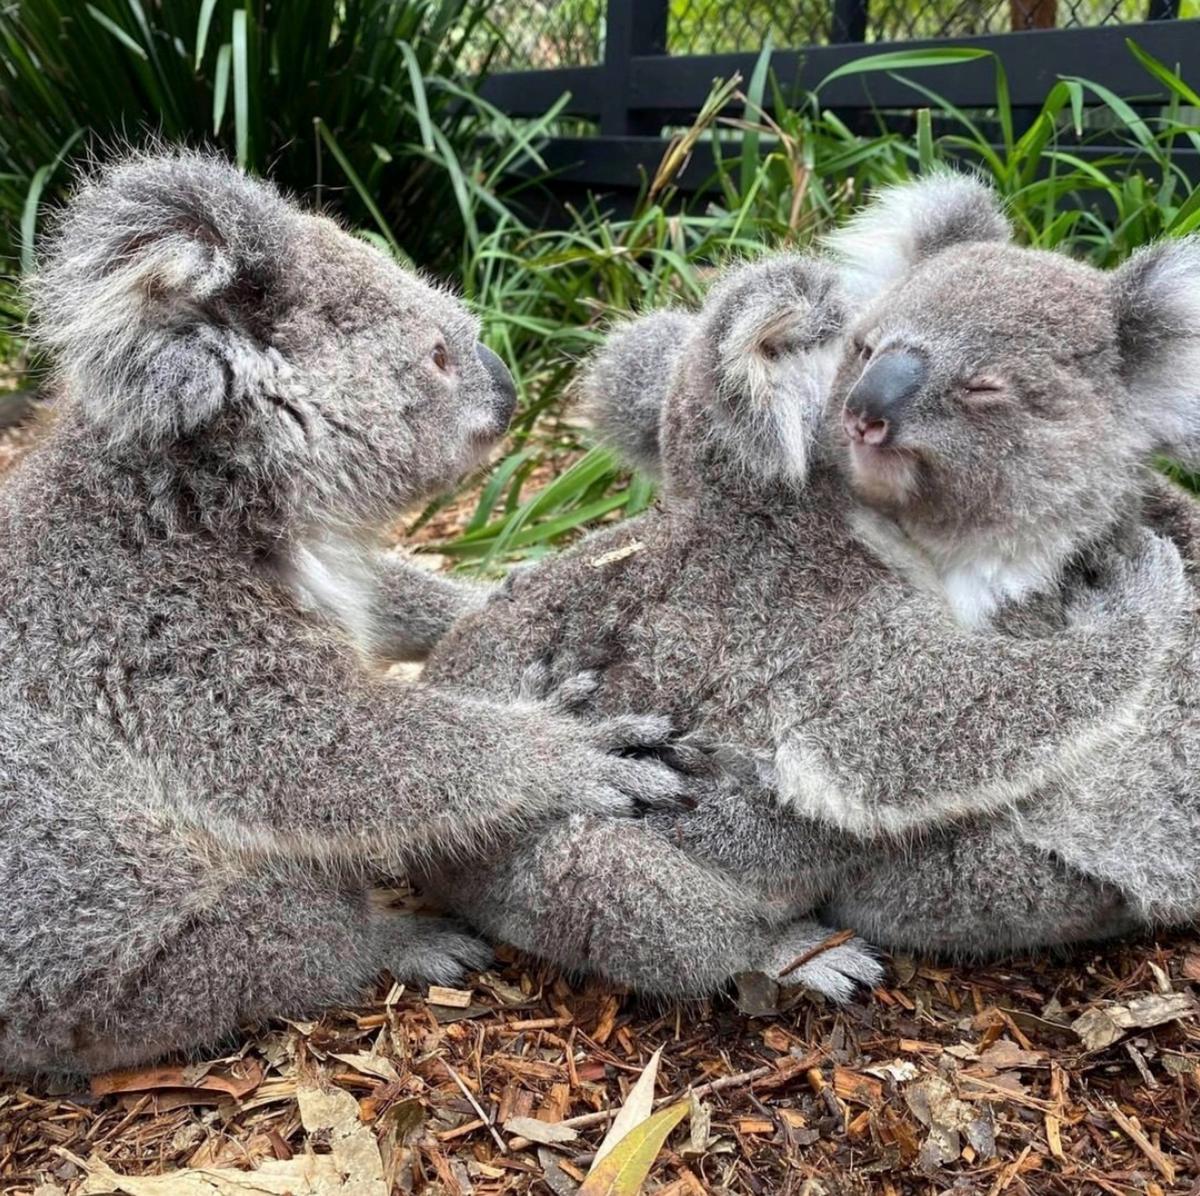 “Our koalas here are all super important to our crucial conservation breeding program," says a spokesperson for the Australian Reptile Park. (Caters News)